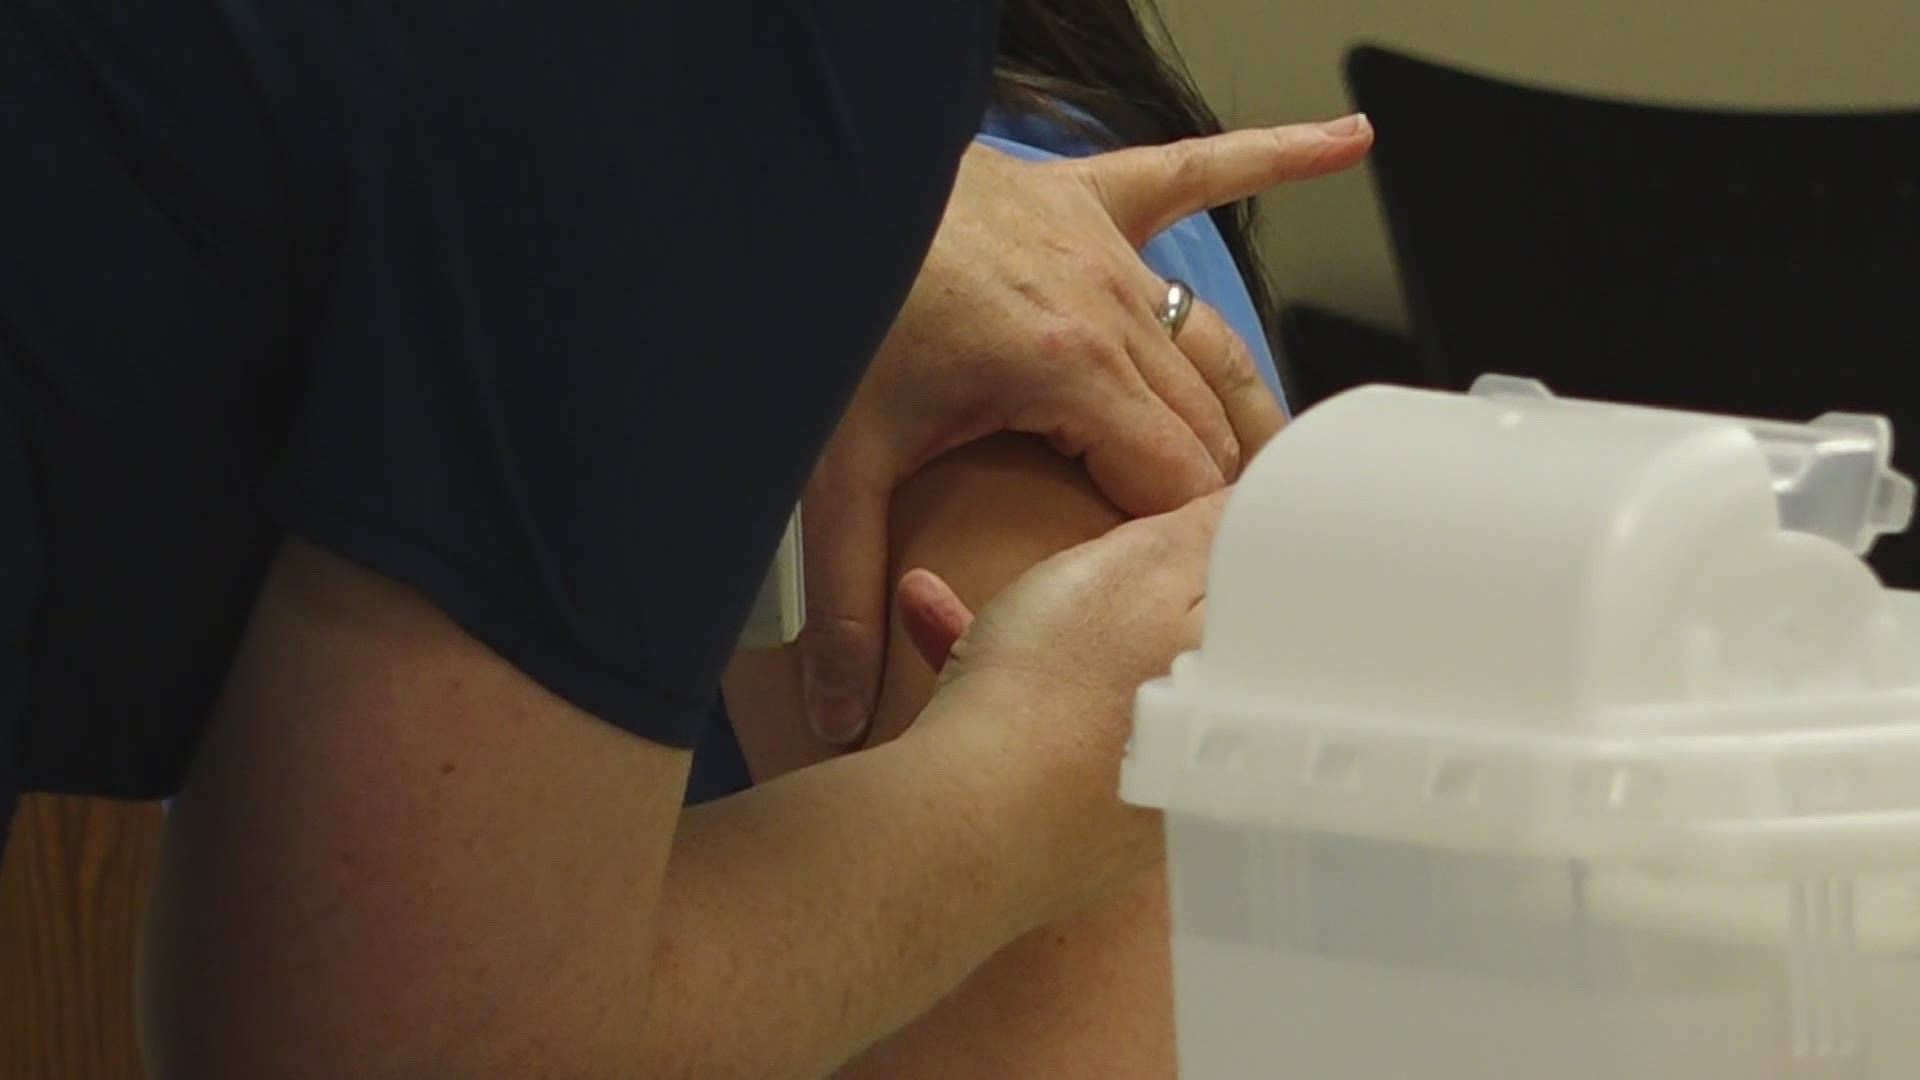 Local providers have reported shortages to their vaccine shipments. The state says the federal government is to blame for those shortages.